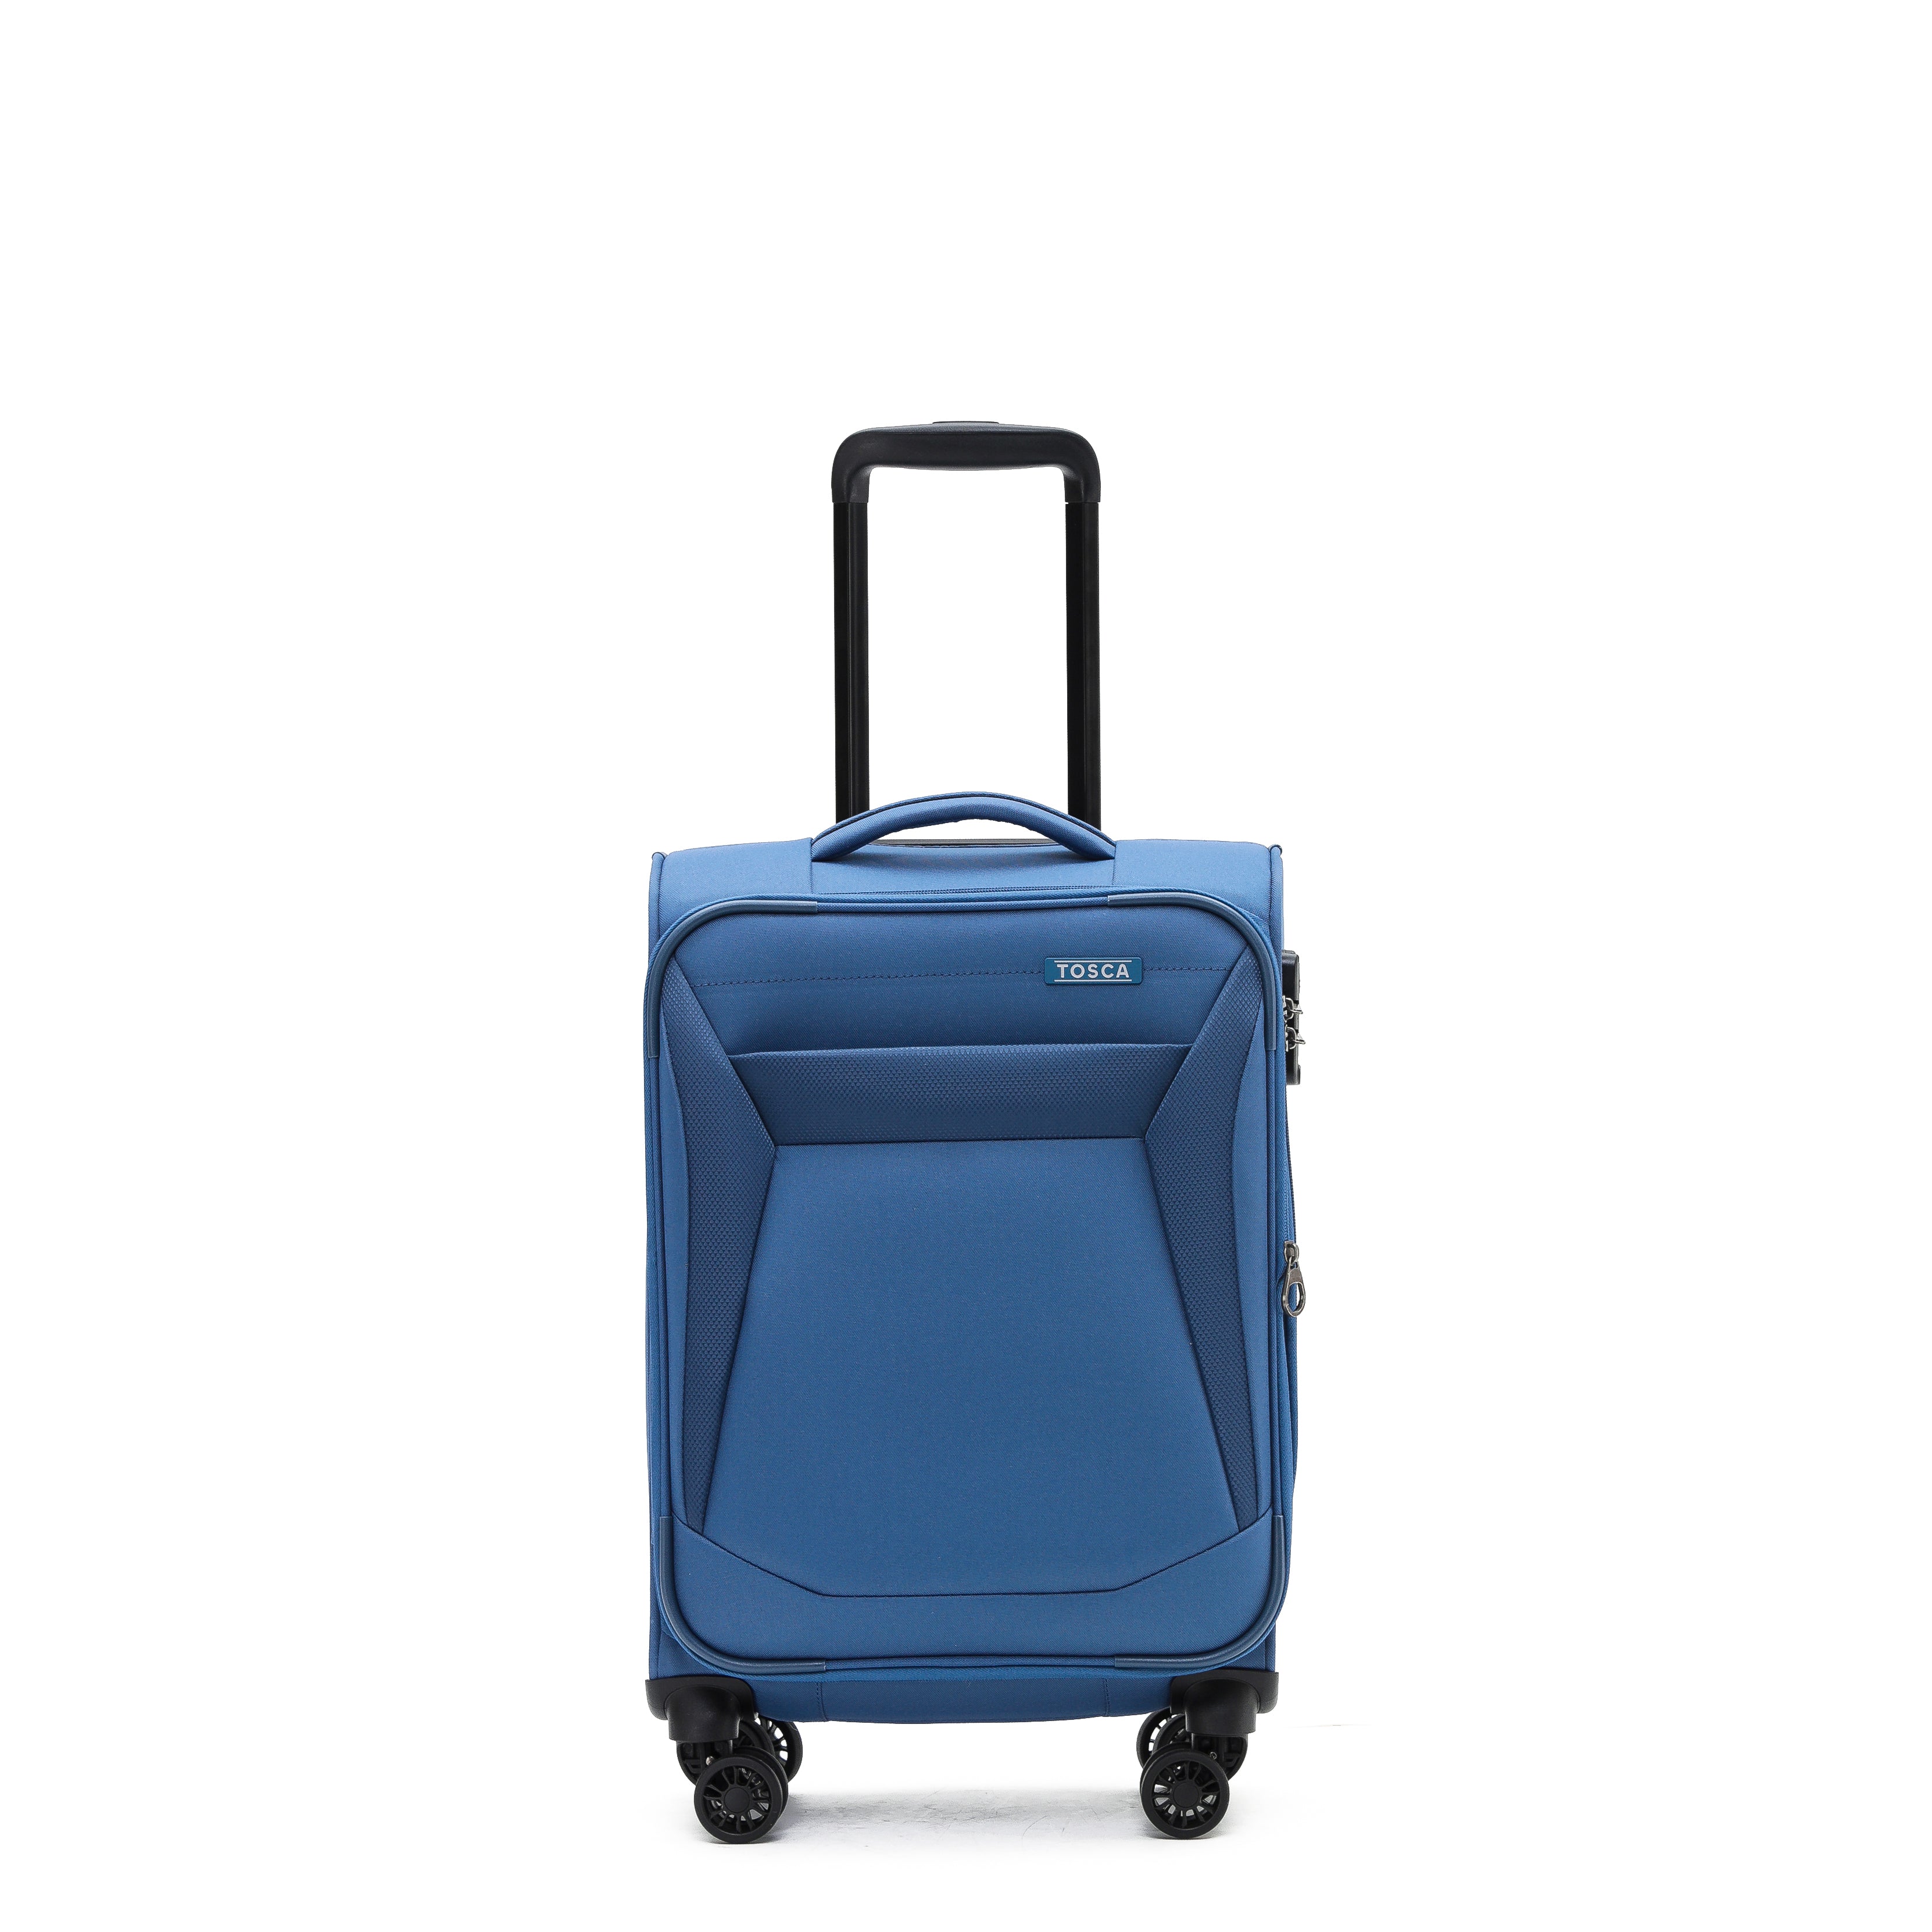 Tosca - Aviator 2.0 set of 3 suitcases (L-M-S) - Blue-6